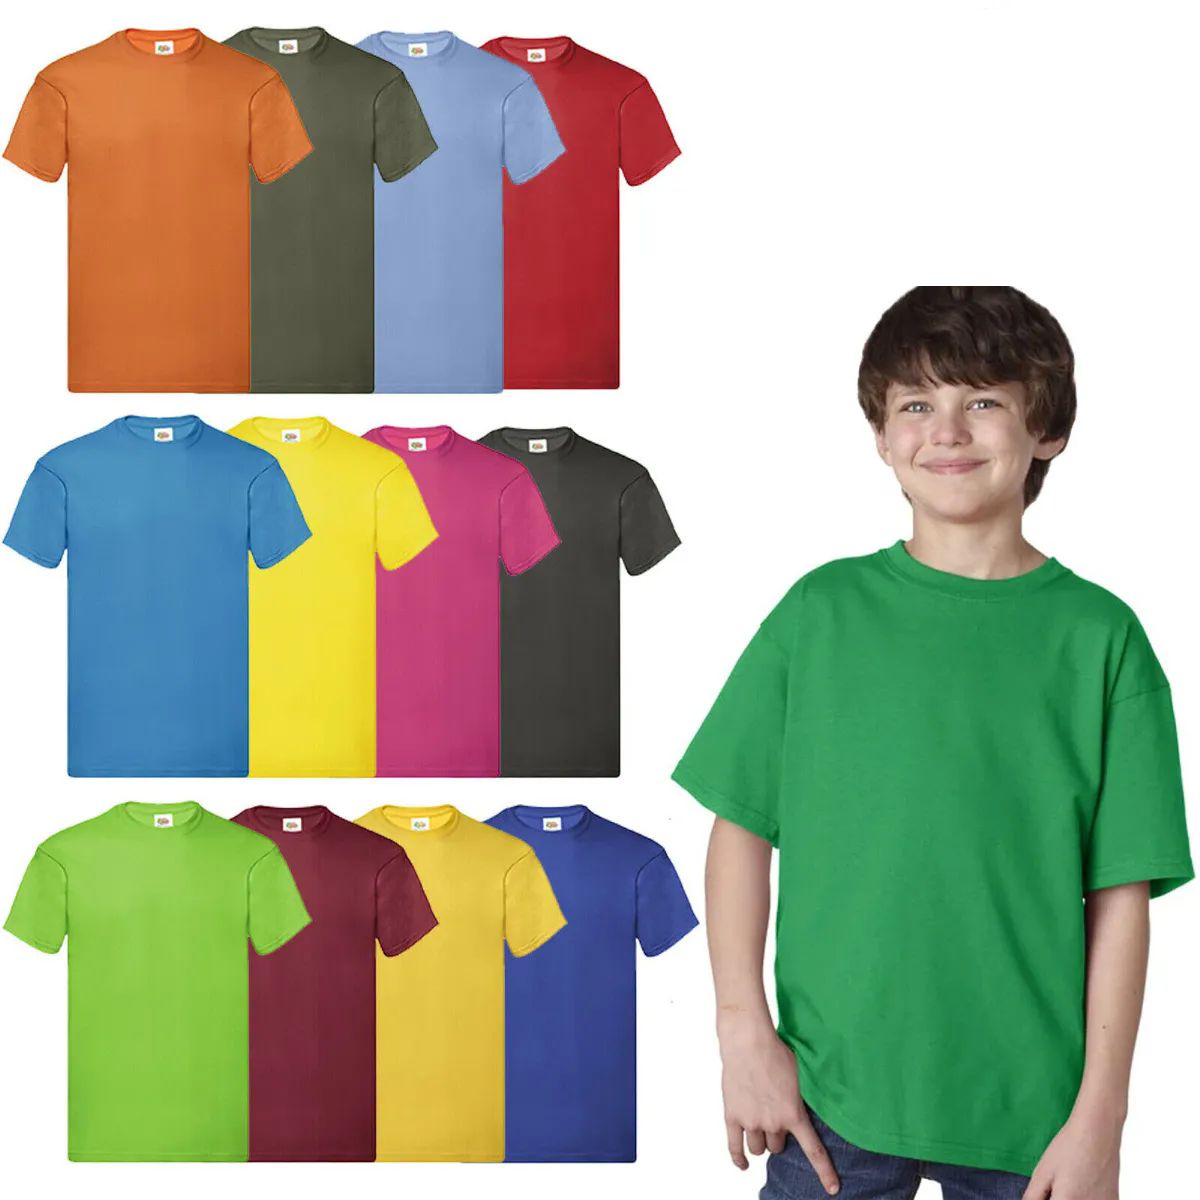 72 Pieces of Billionhats Kids Youth Cotton Assorted Colors T-Shirts Size Xlarge